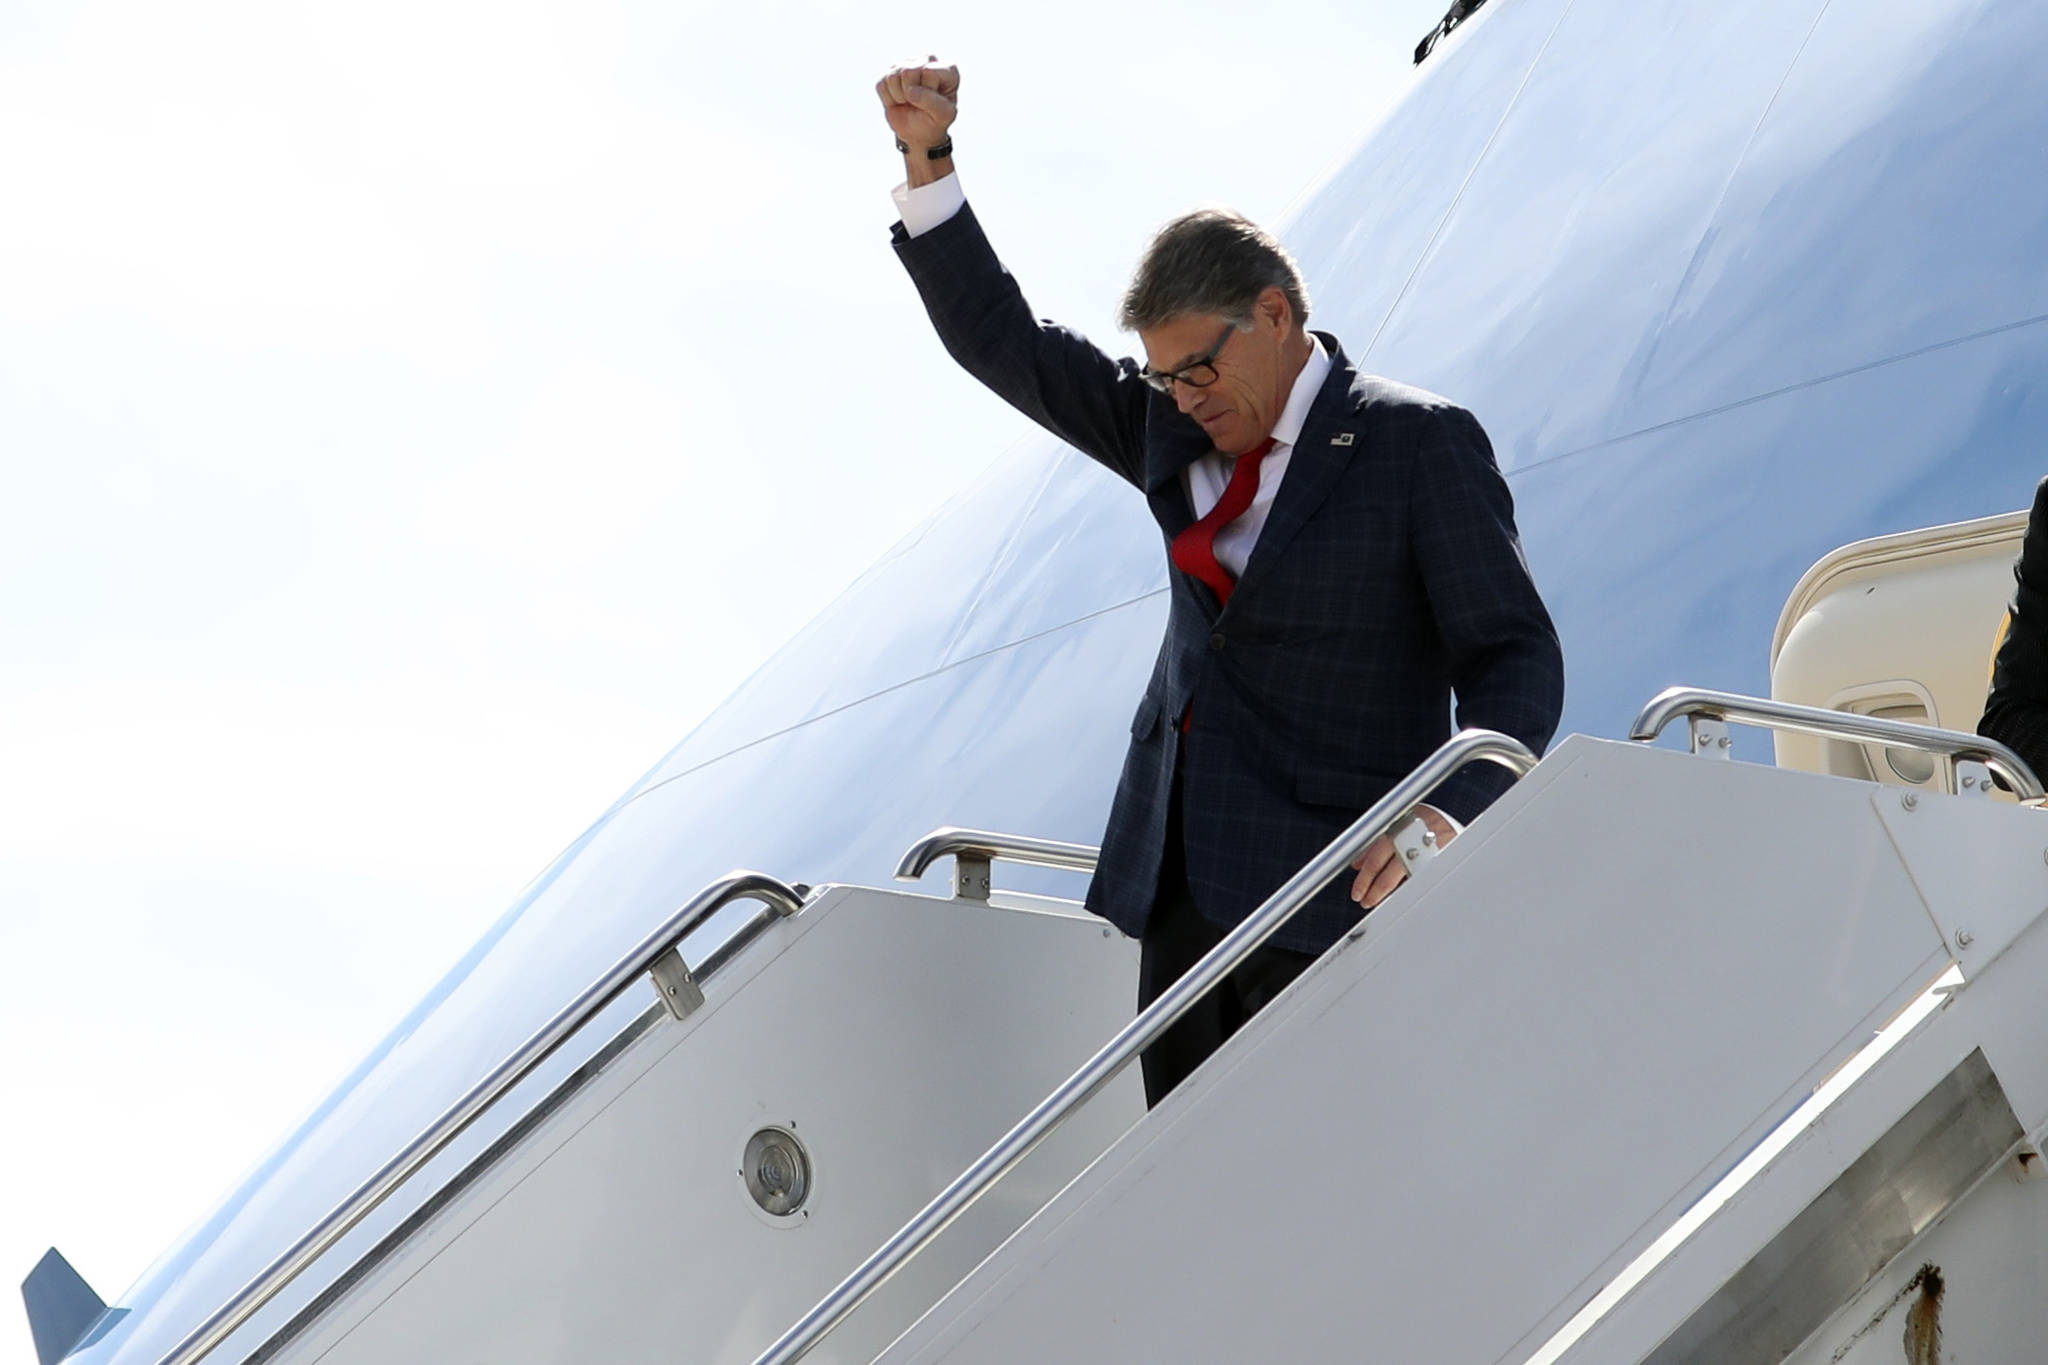 Energy Secretary Rick Perry gestures as he arrives on Air Force One with President Donald Trump at Naval Air Station Joint Reserve Base in Fort Worth, Texas, Thursday, Oct. 17, 2019. (AP Photo/Andrew Harnik)